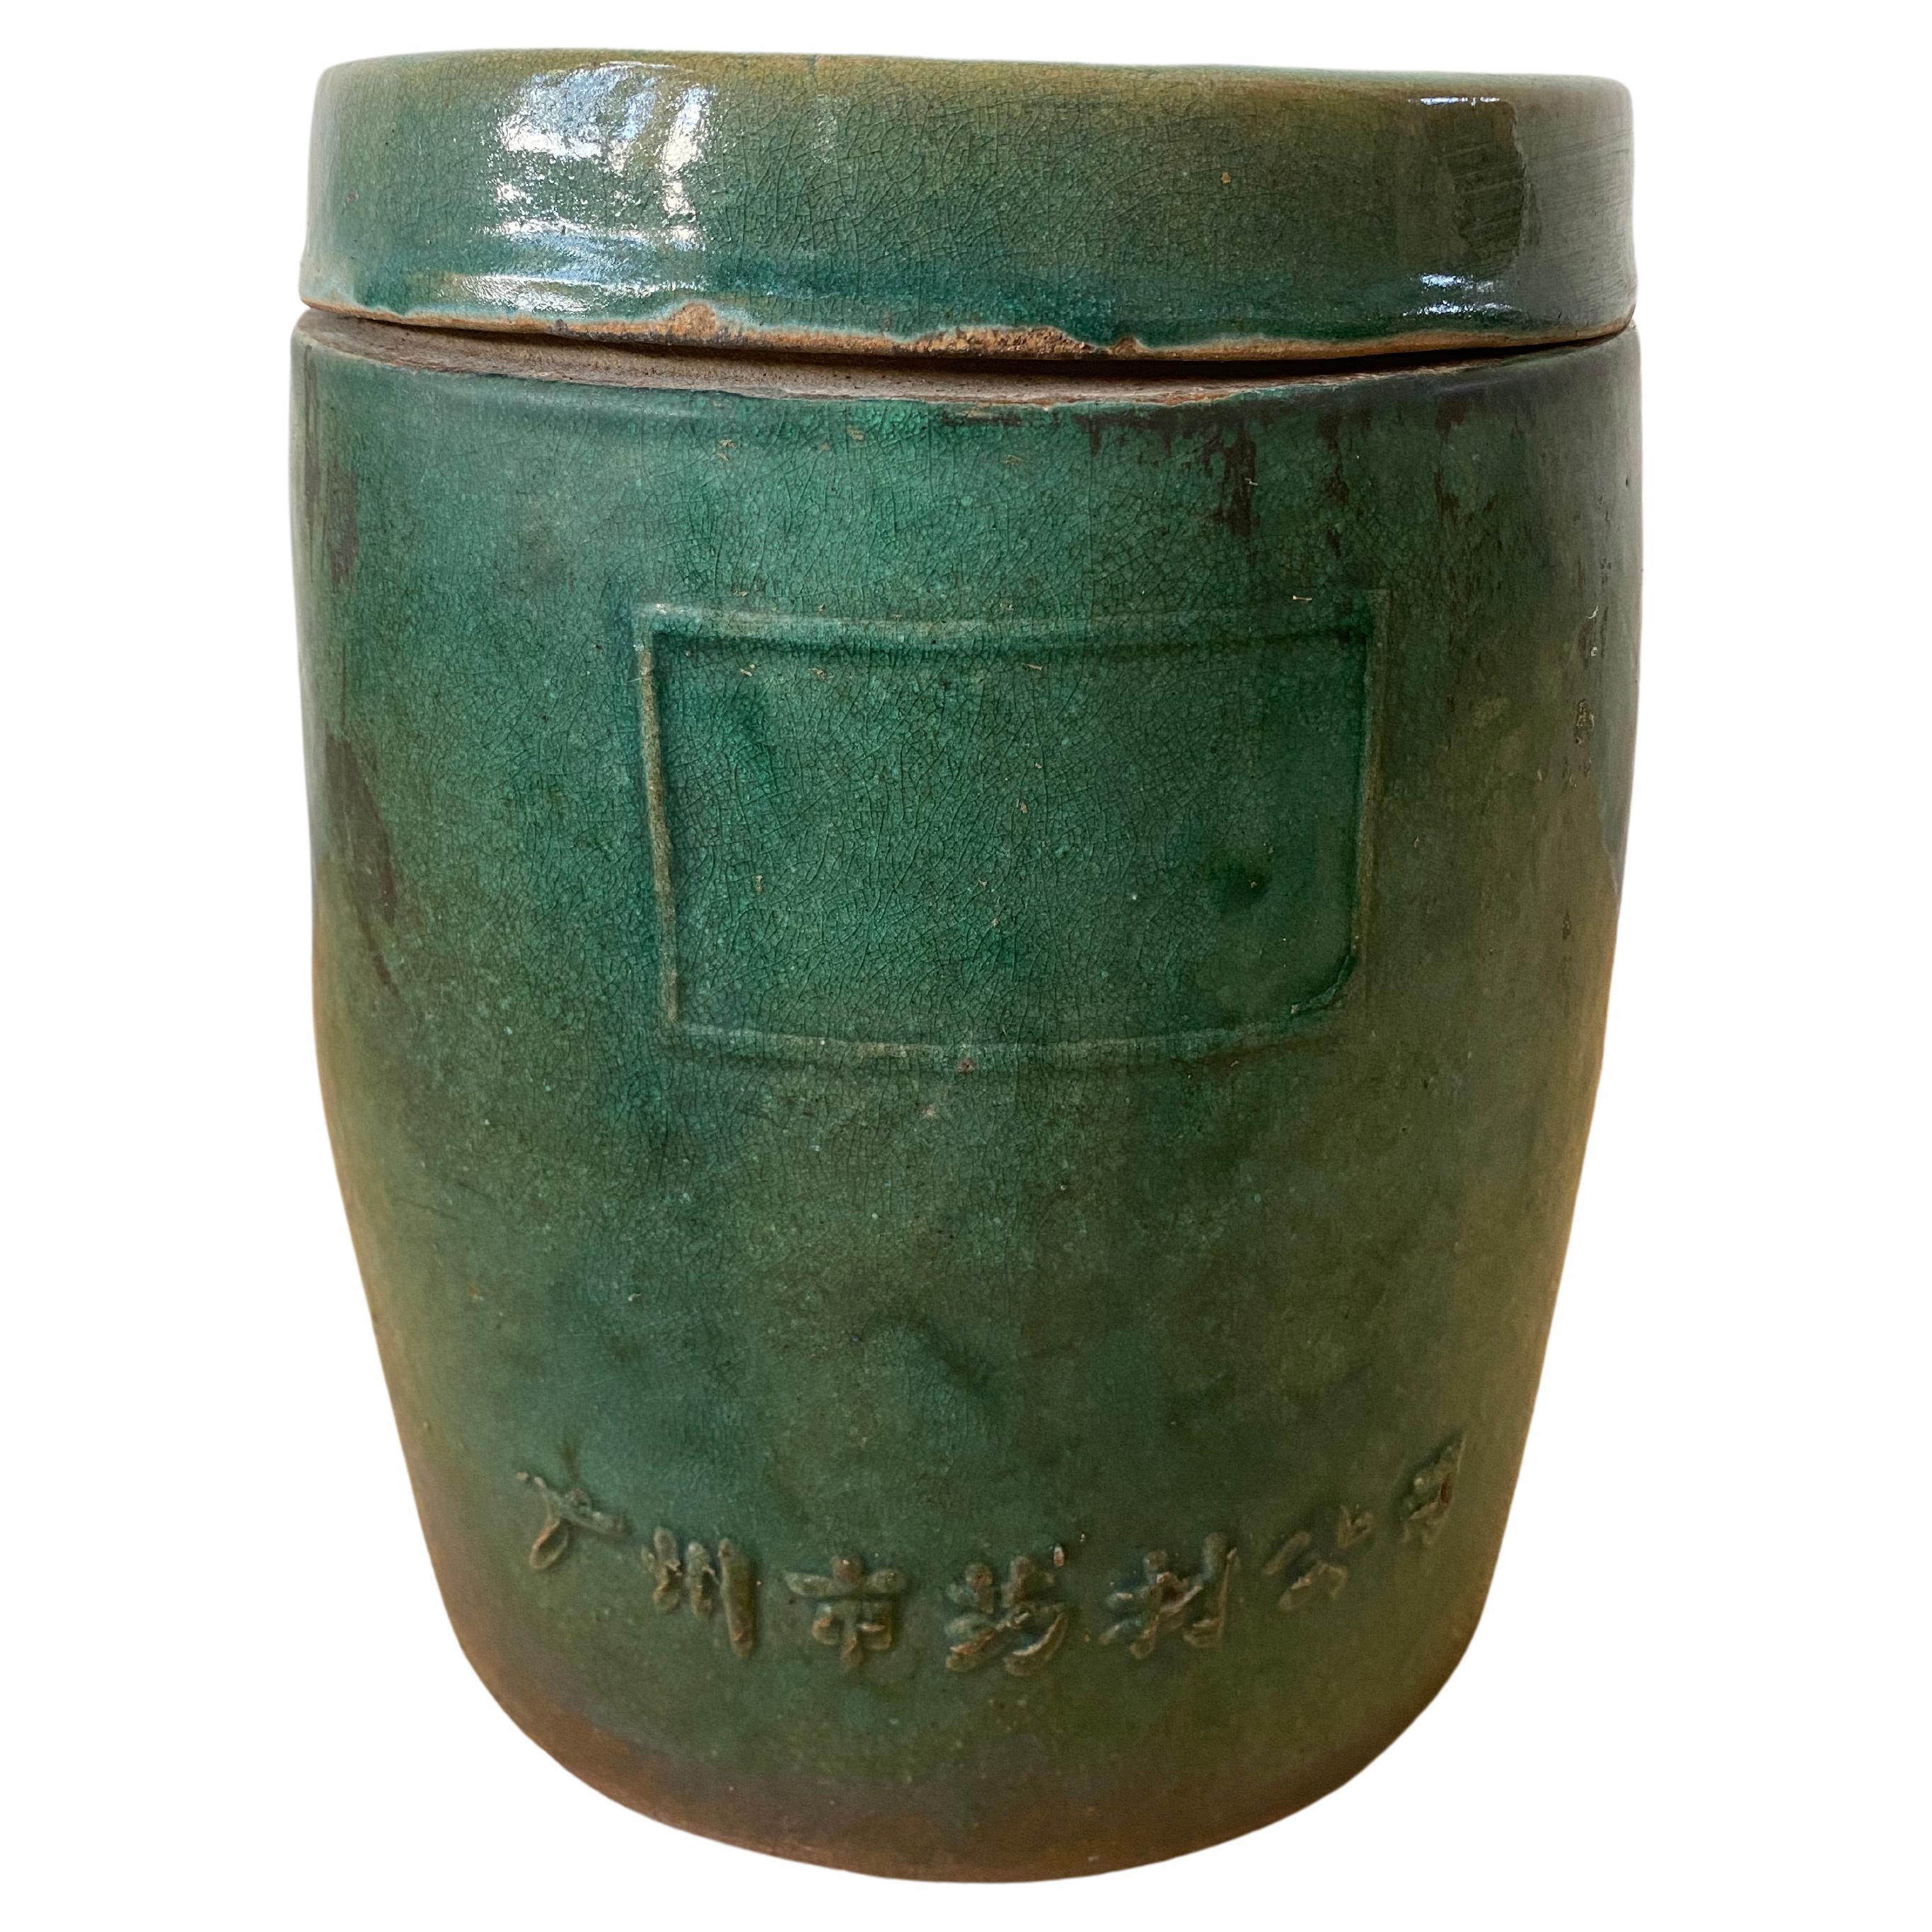 Chinese Ceramic Guangzhou Medicine Company 'Apothecary' Jar, Early 20th Century